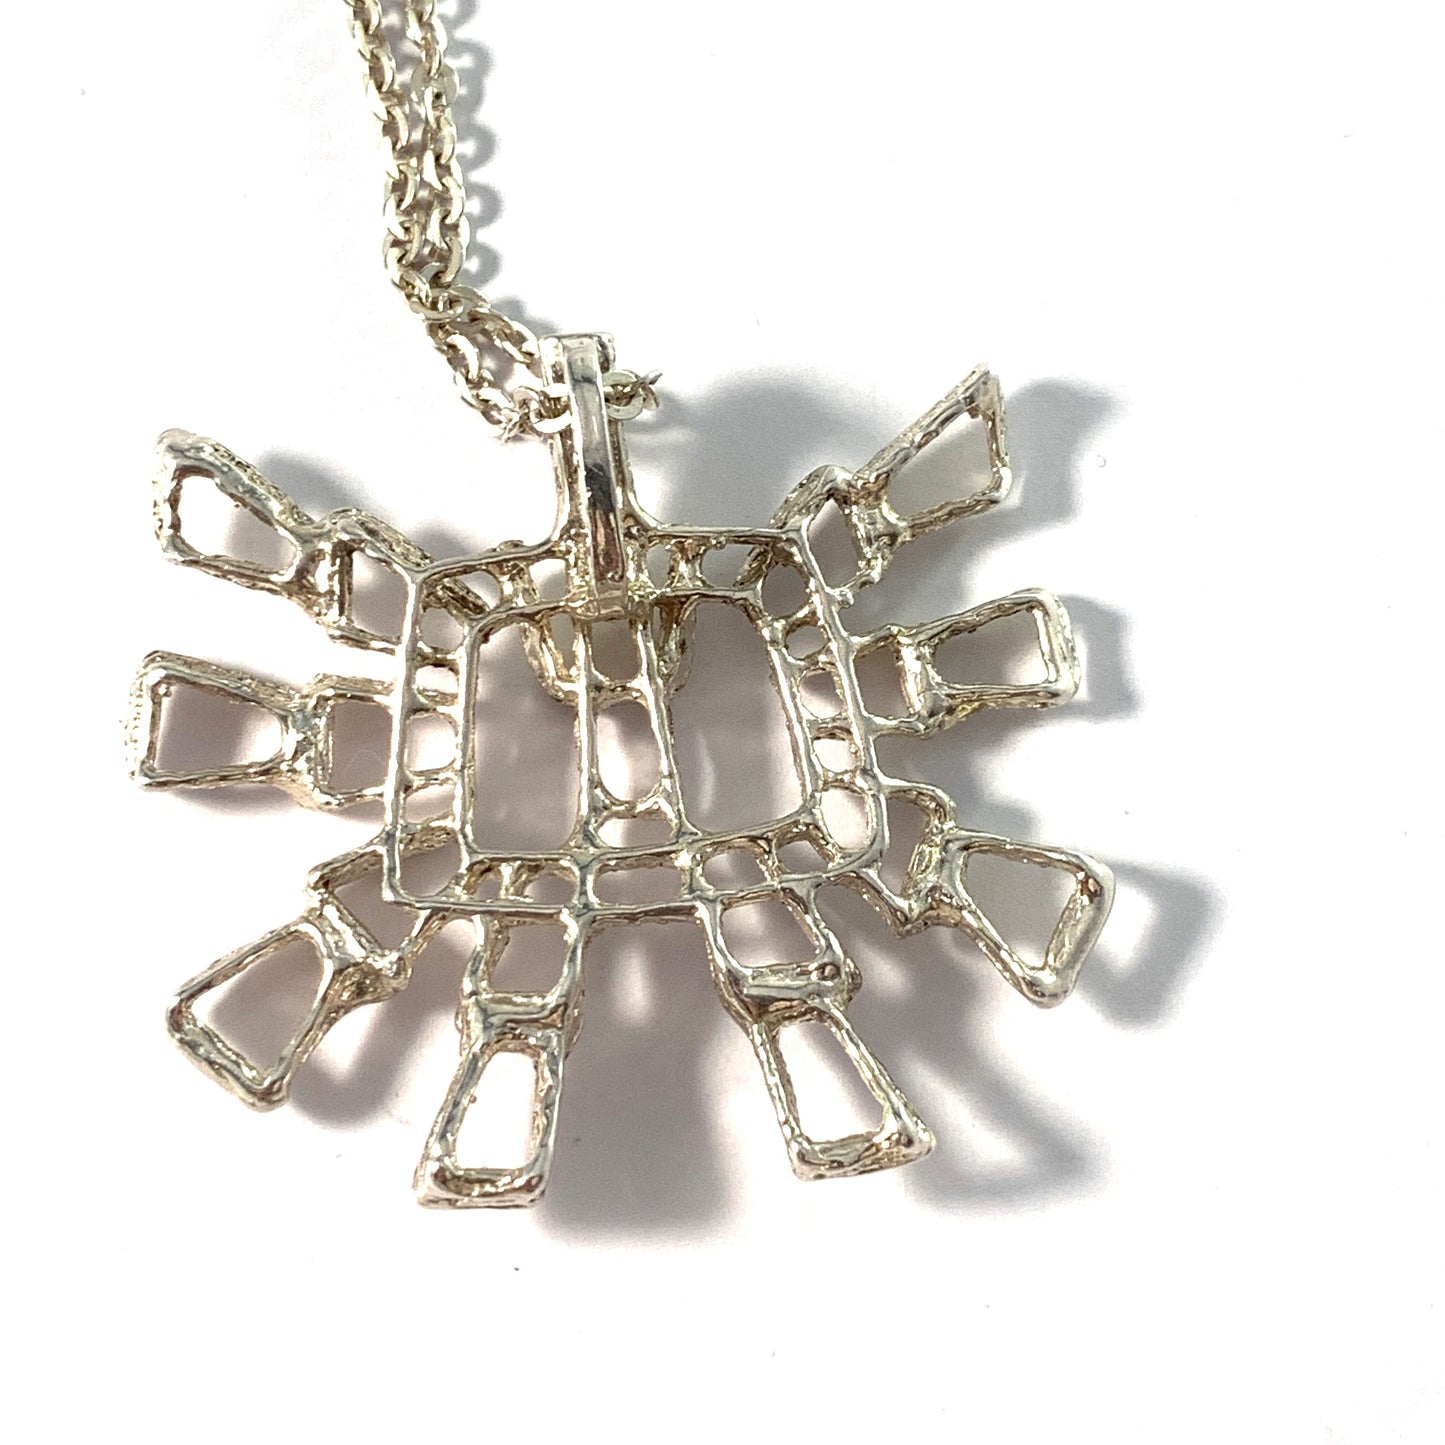 Studio Else and Paul, Norway 1960s. Sterling Silver Pendant Necklace.